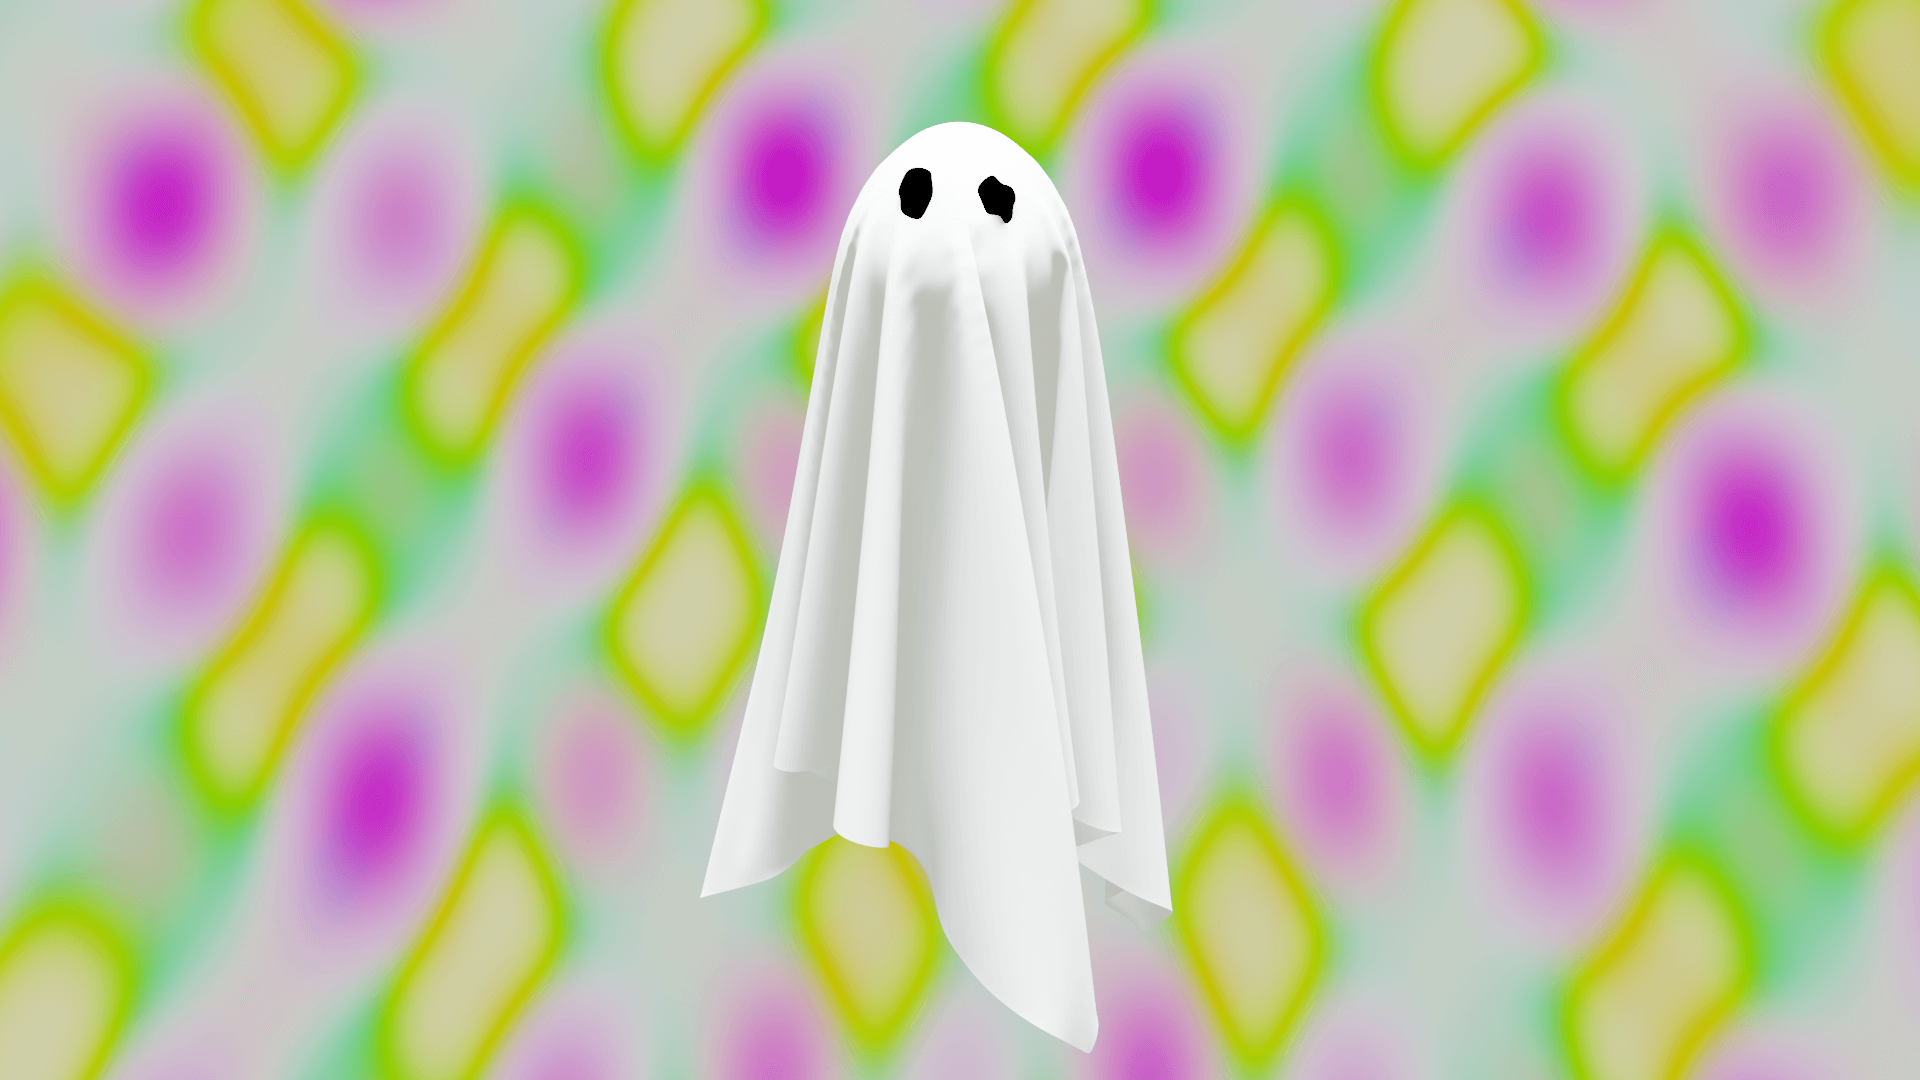 ghoST